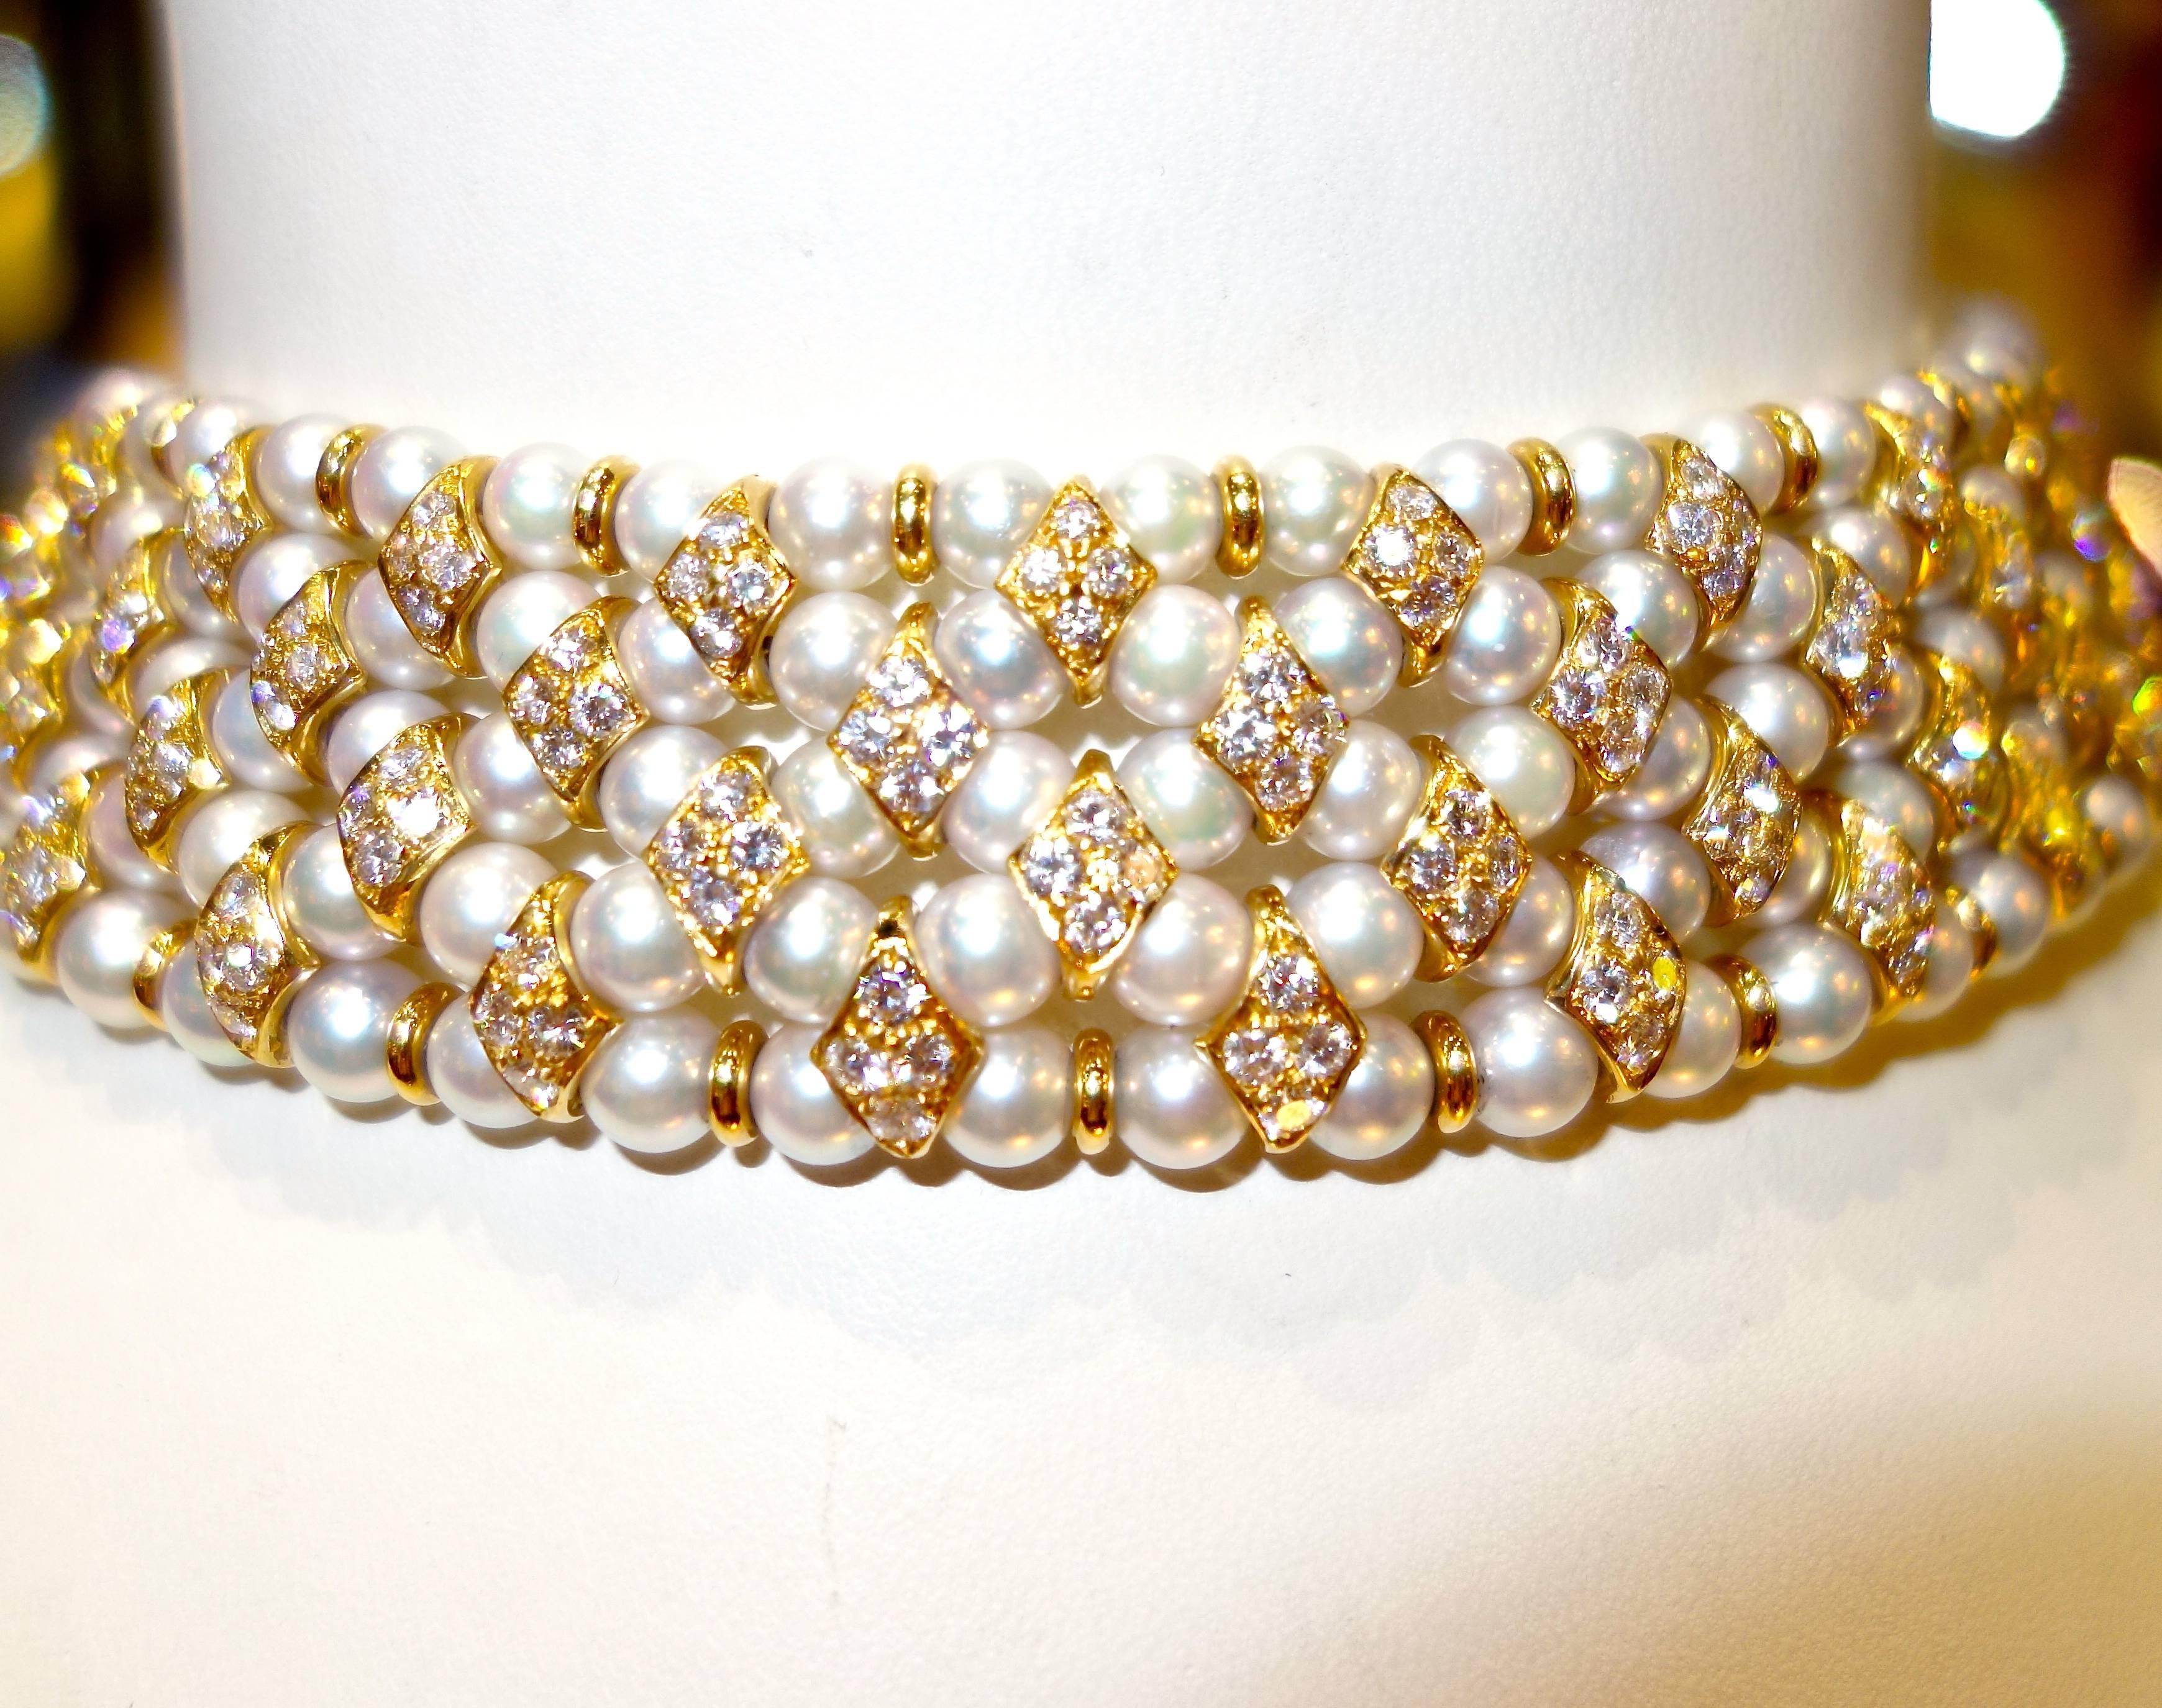 Over 10 cts of fine white diamonds, near colorless and very slightly included (G/H, VS) are set throughout the front half of this choker necklace accenting the fine pearls. The pearls are all very lustrous and clean of blemishes. This 18K necklace